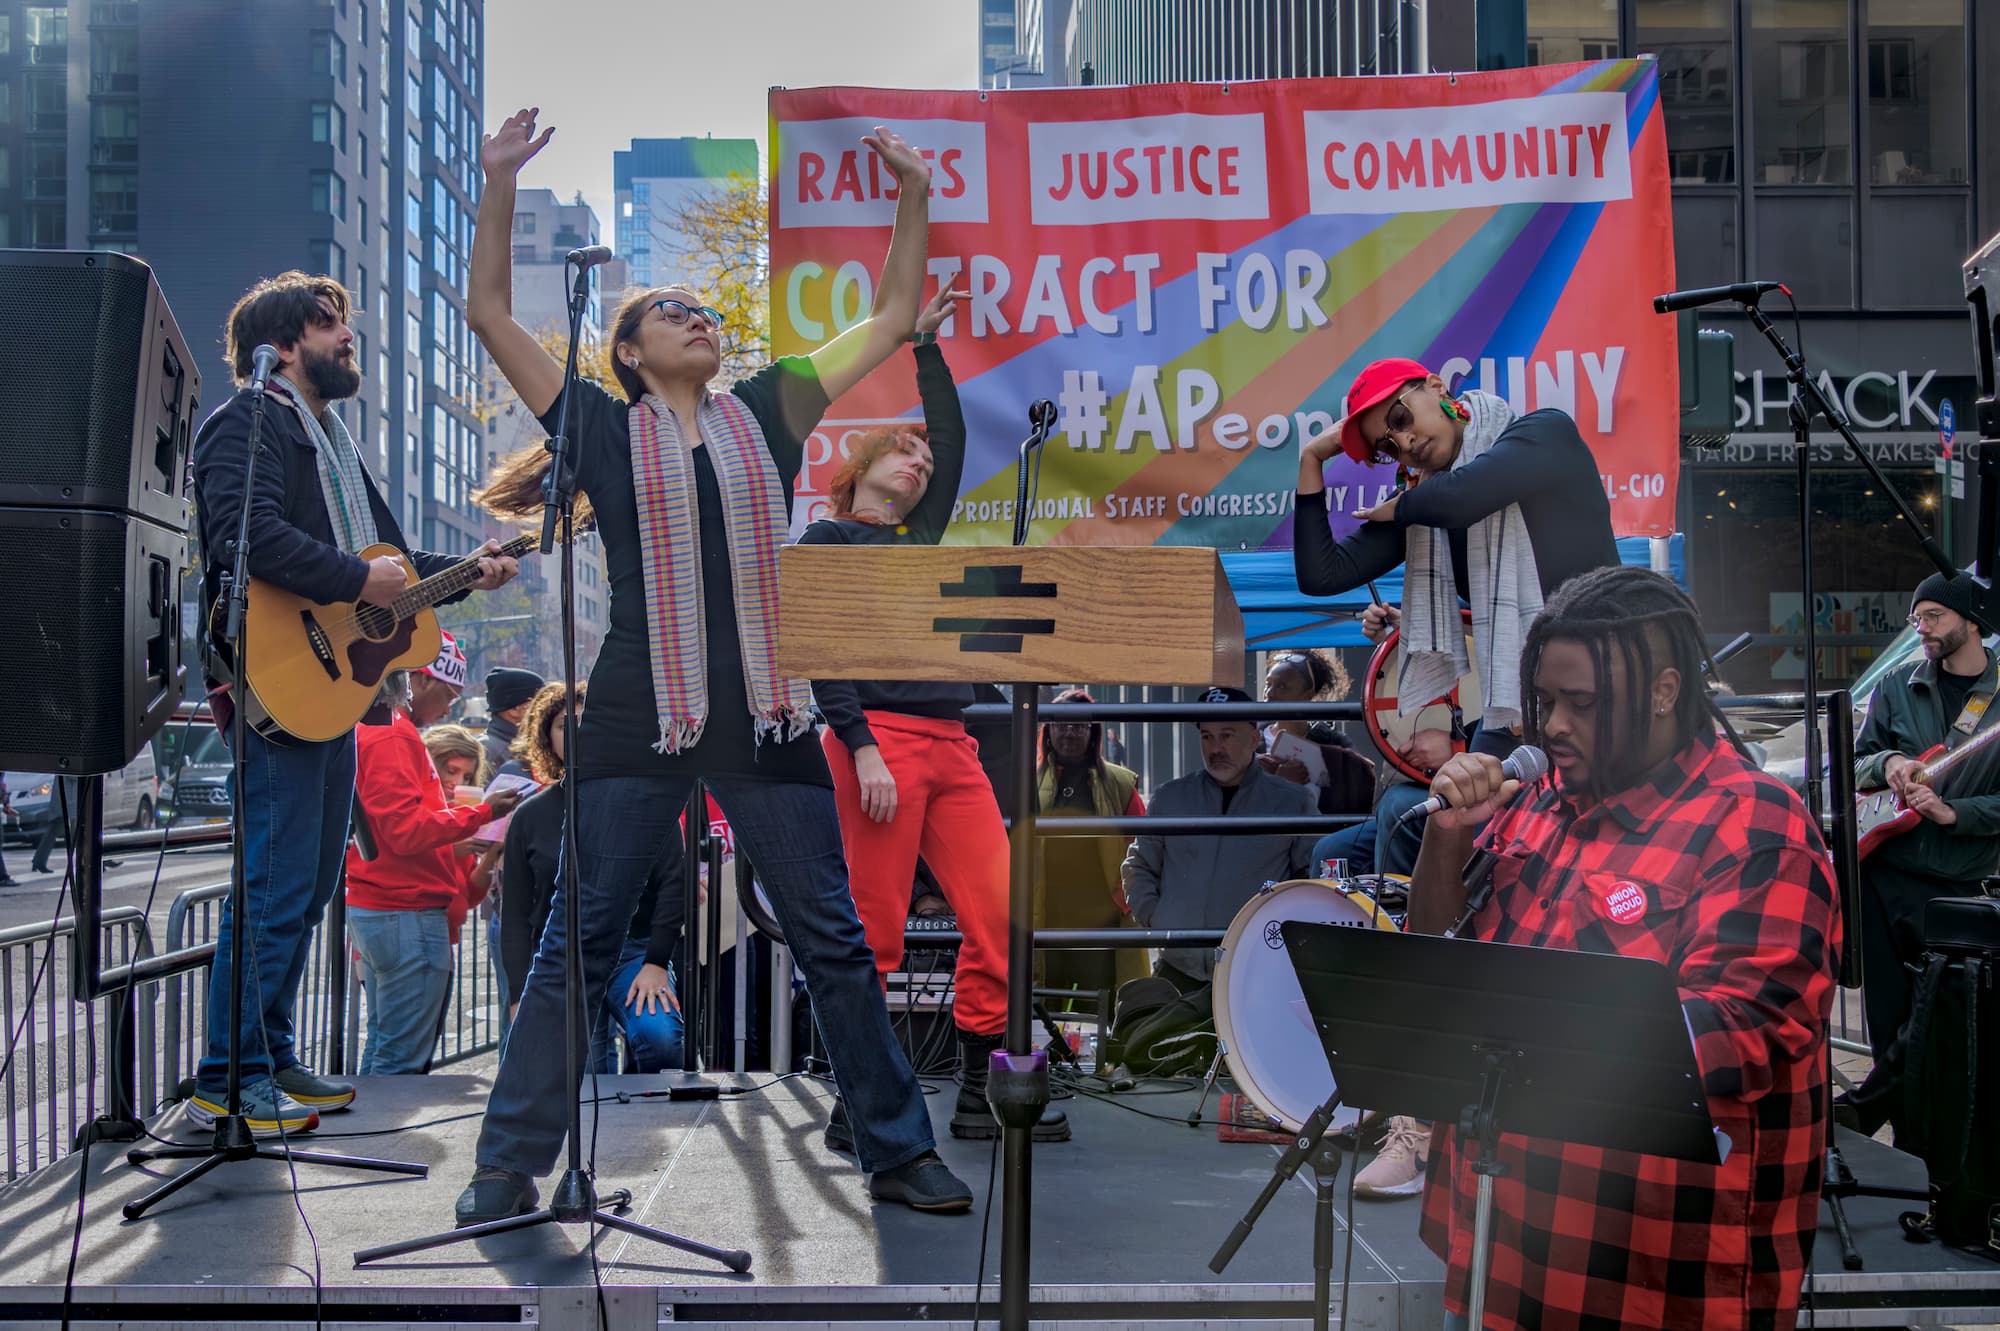 Radical Evolution performing at the Sing Out Shout Out Rally for #APeoplesCUNY by Erik McGregor